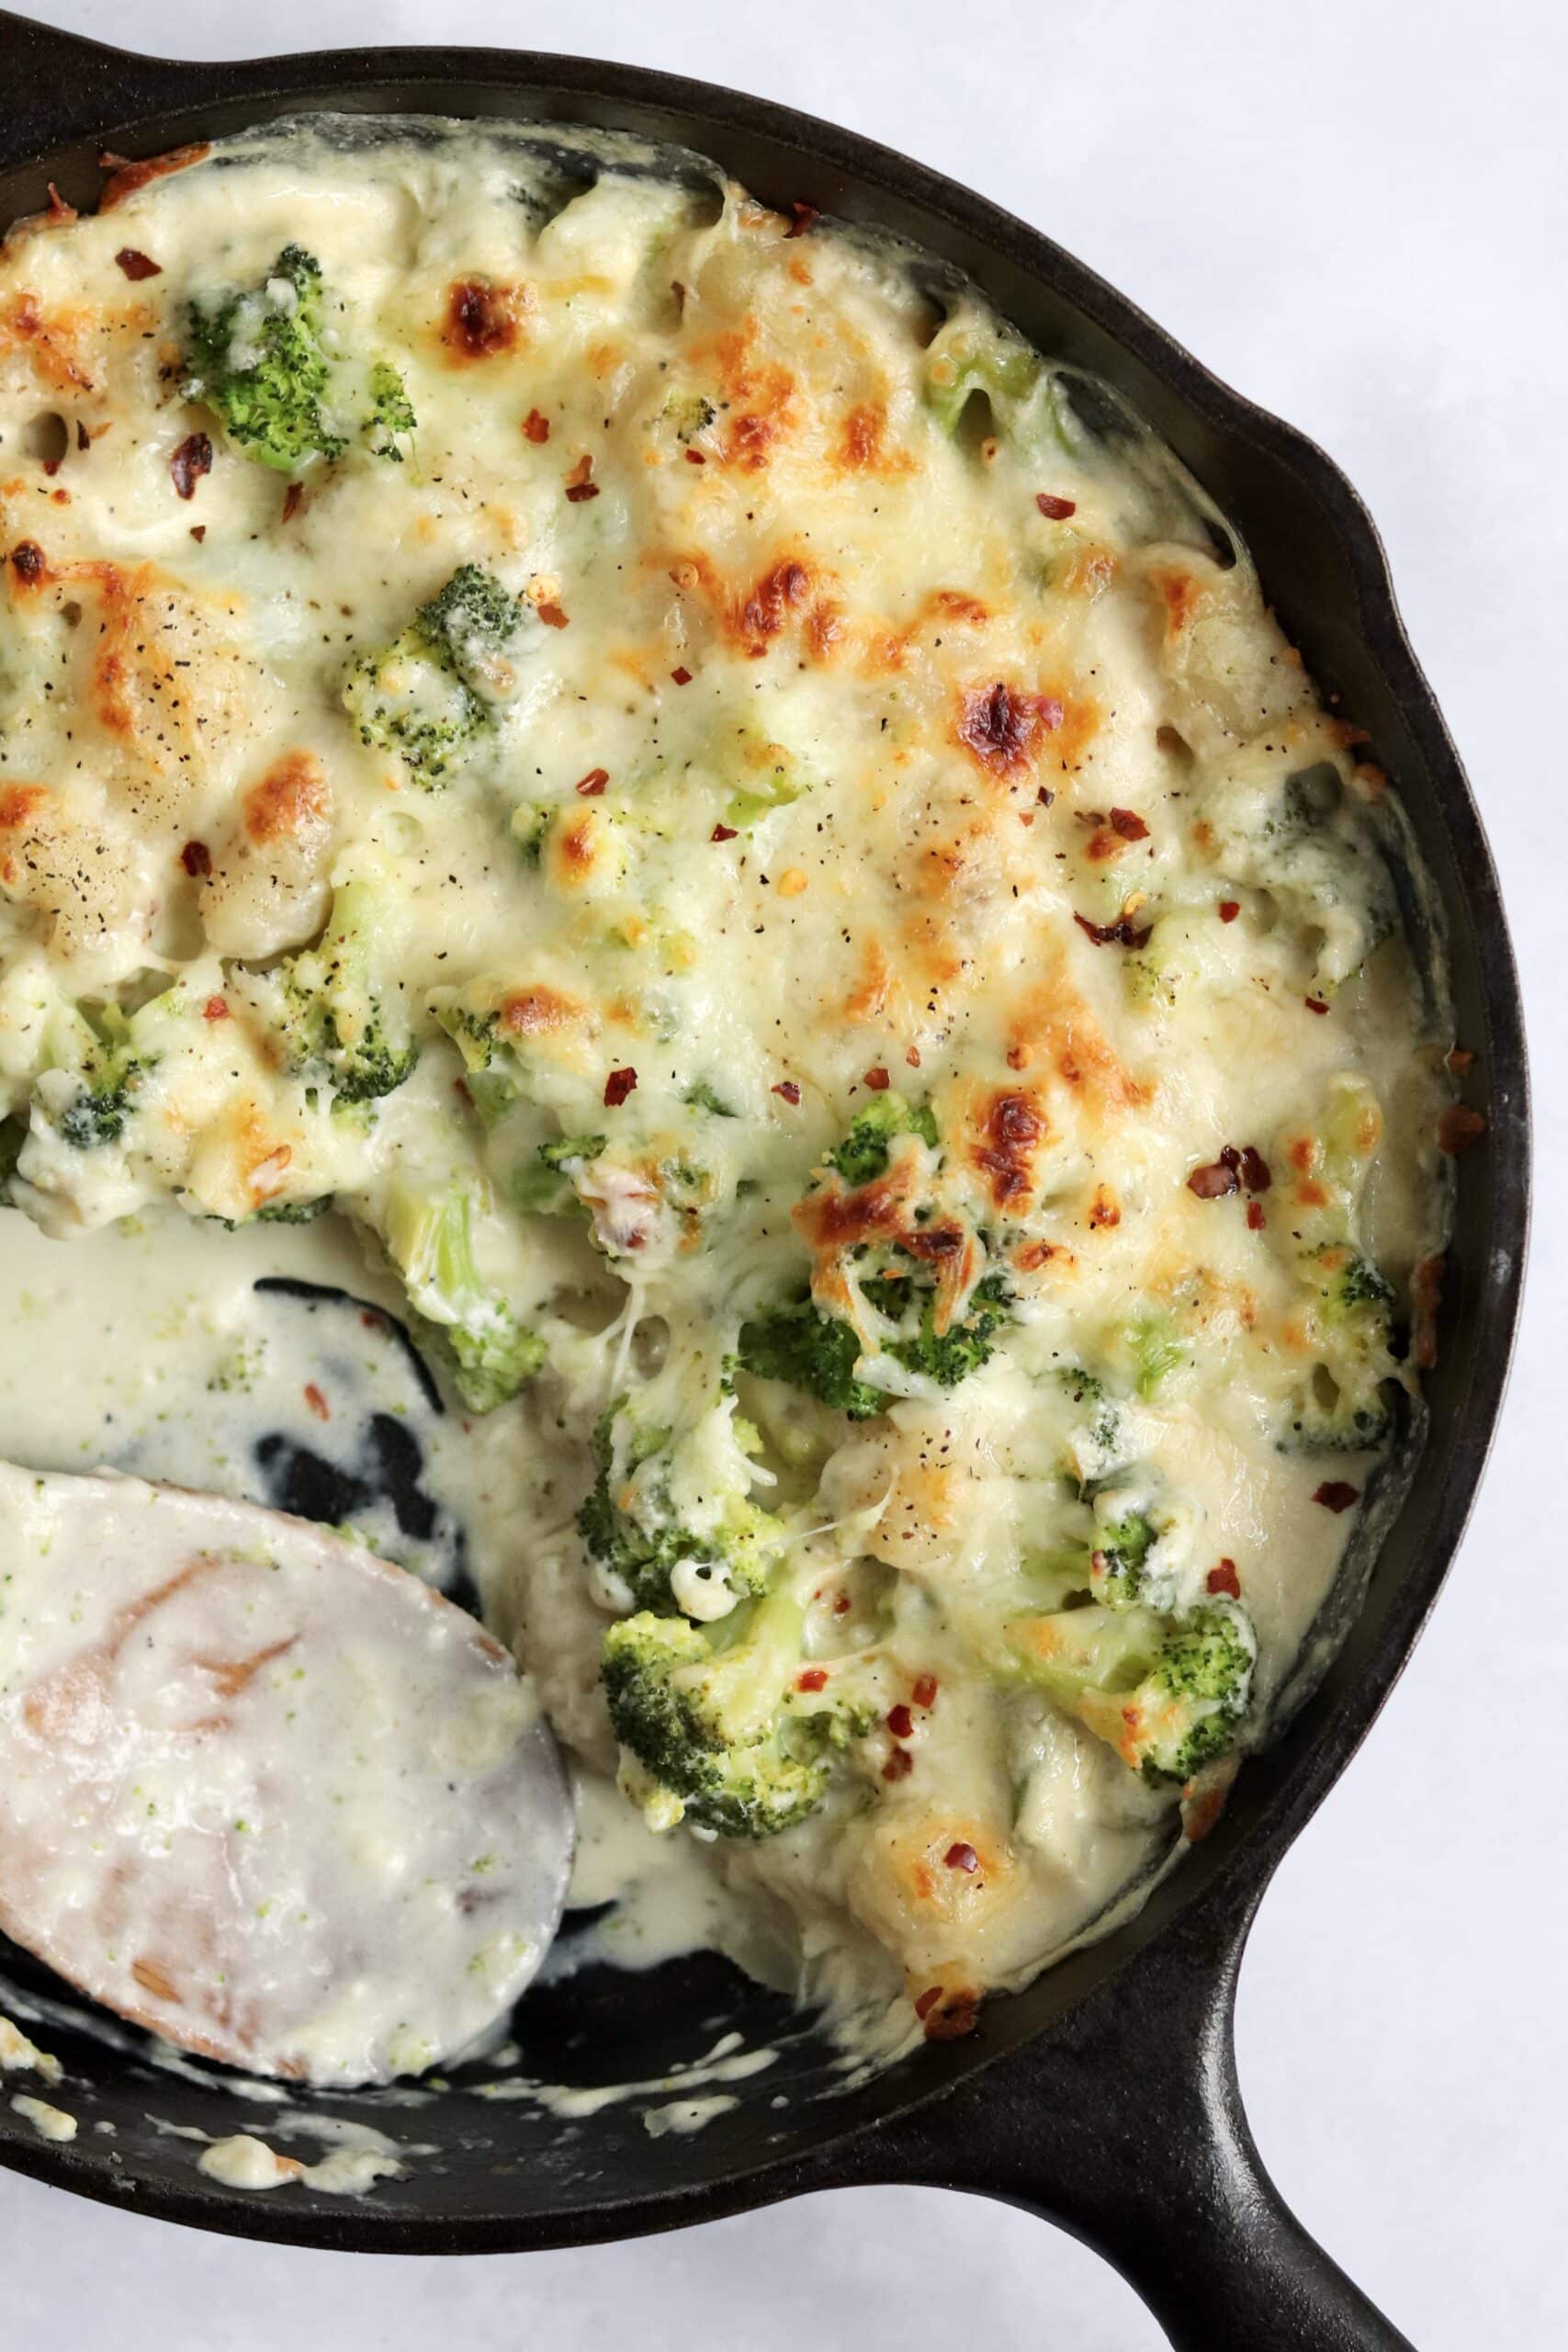 Creamy and cheesy broccoli gnocchi baked in a cast iron skillet with a wooden spoon